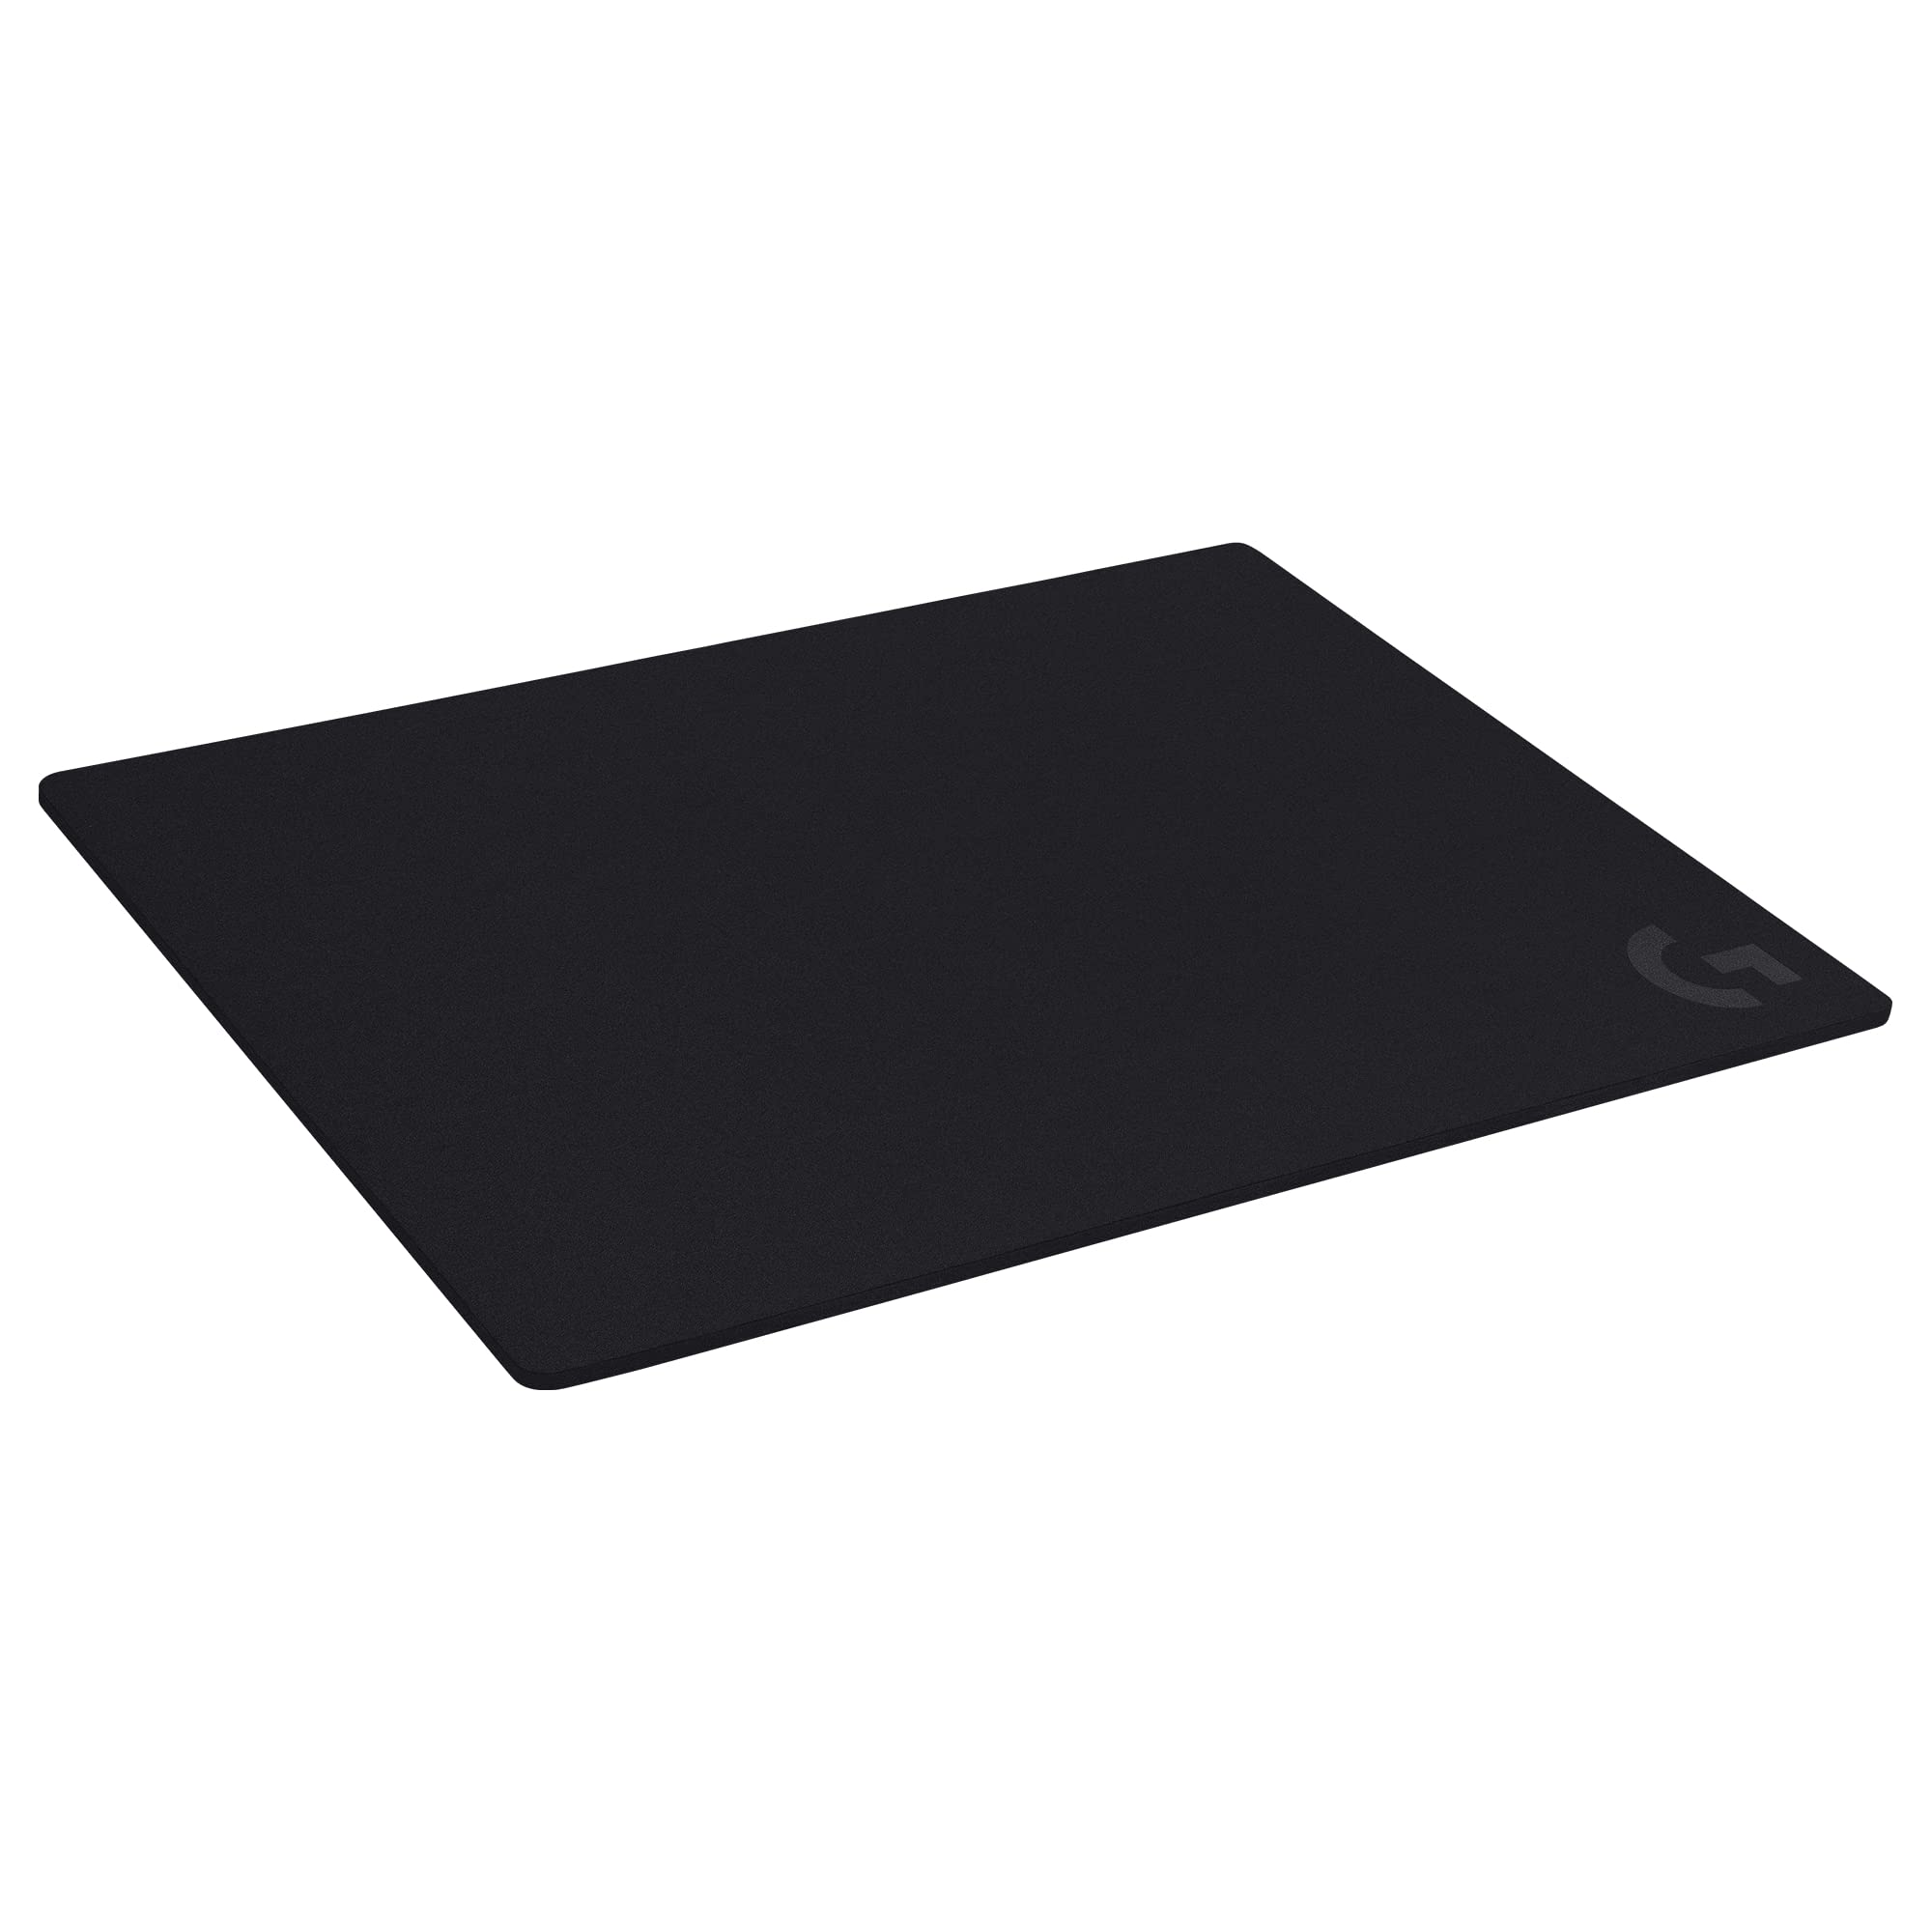 $19.99: Logitech G740 Large Thick Gaming Mouse Pad